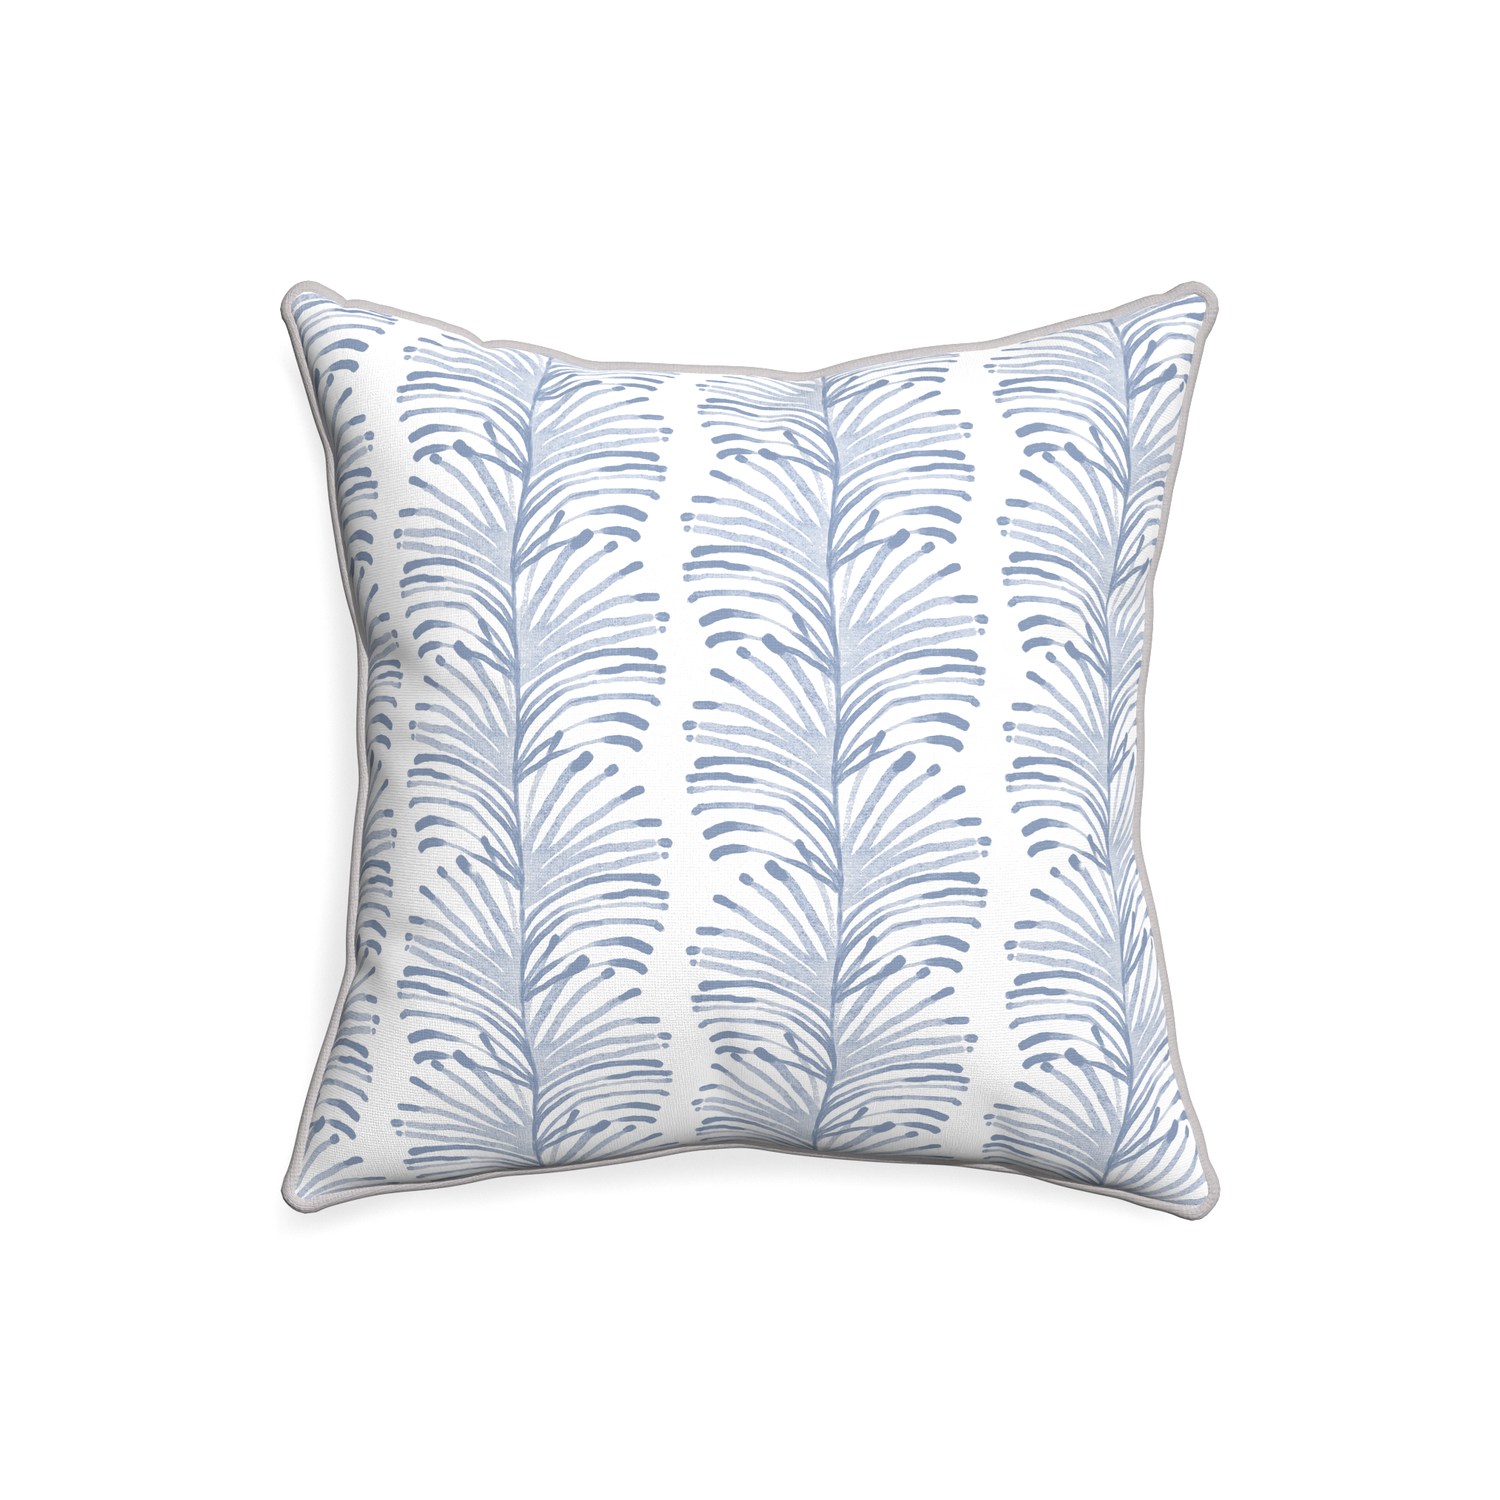 20-square emma sky custom sky blue botanical stripepillow with pebble piping on white background